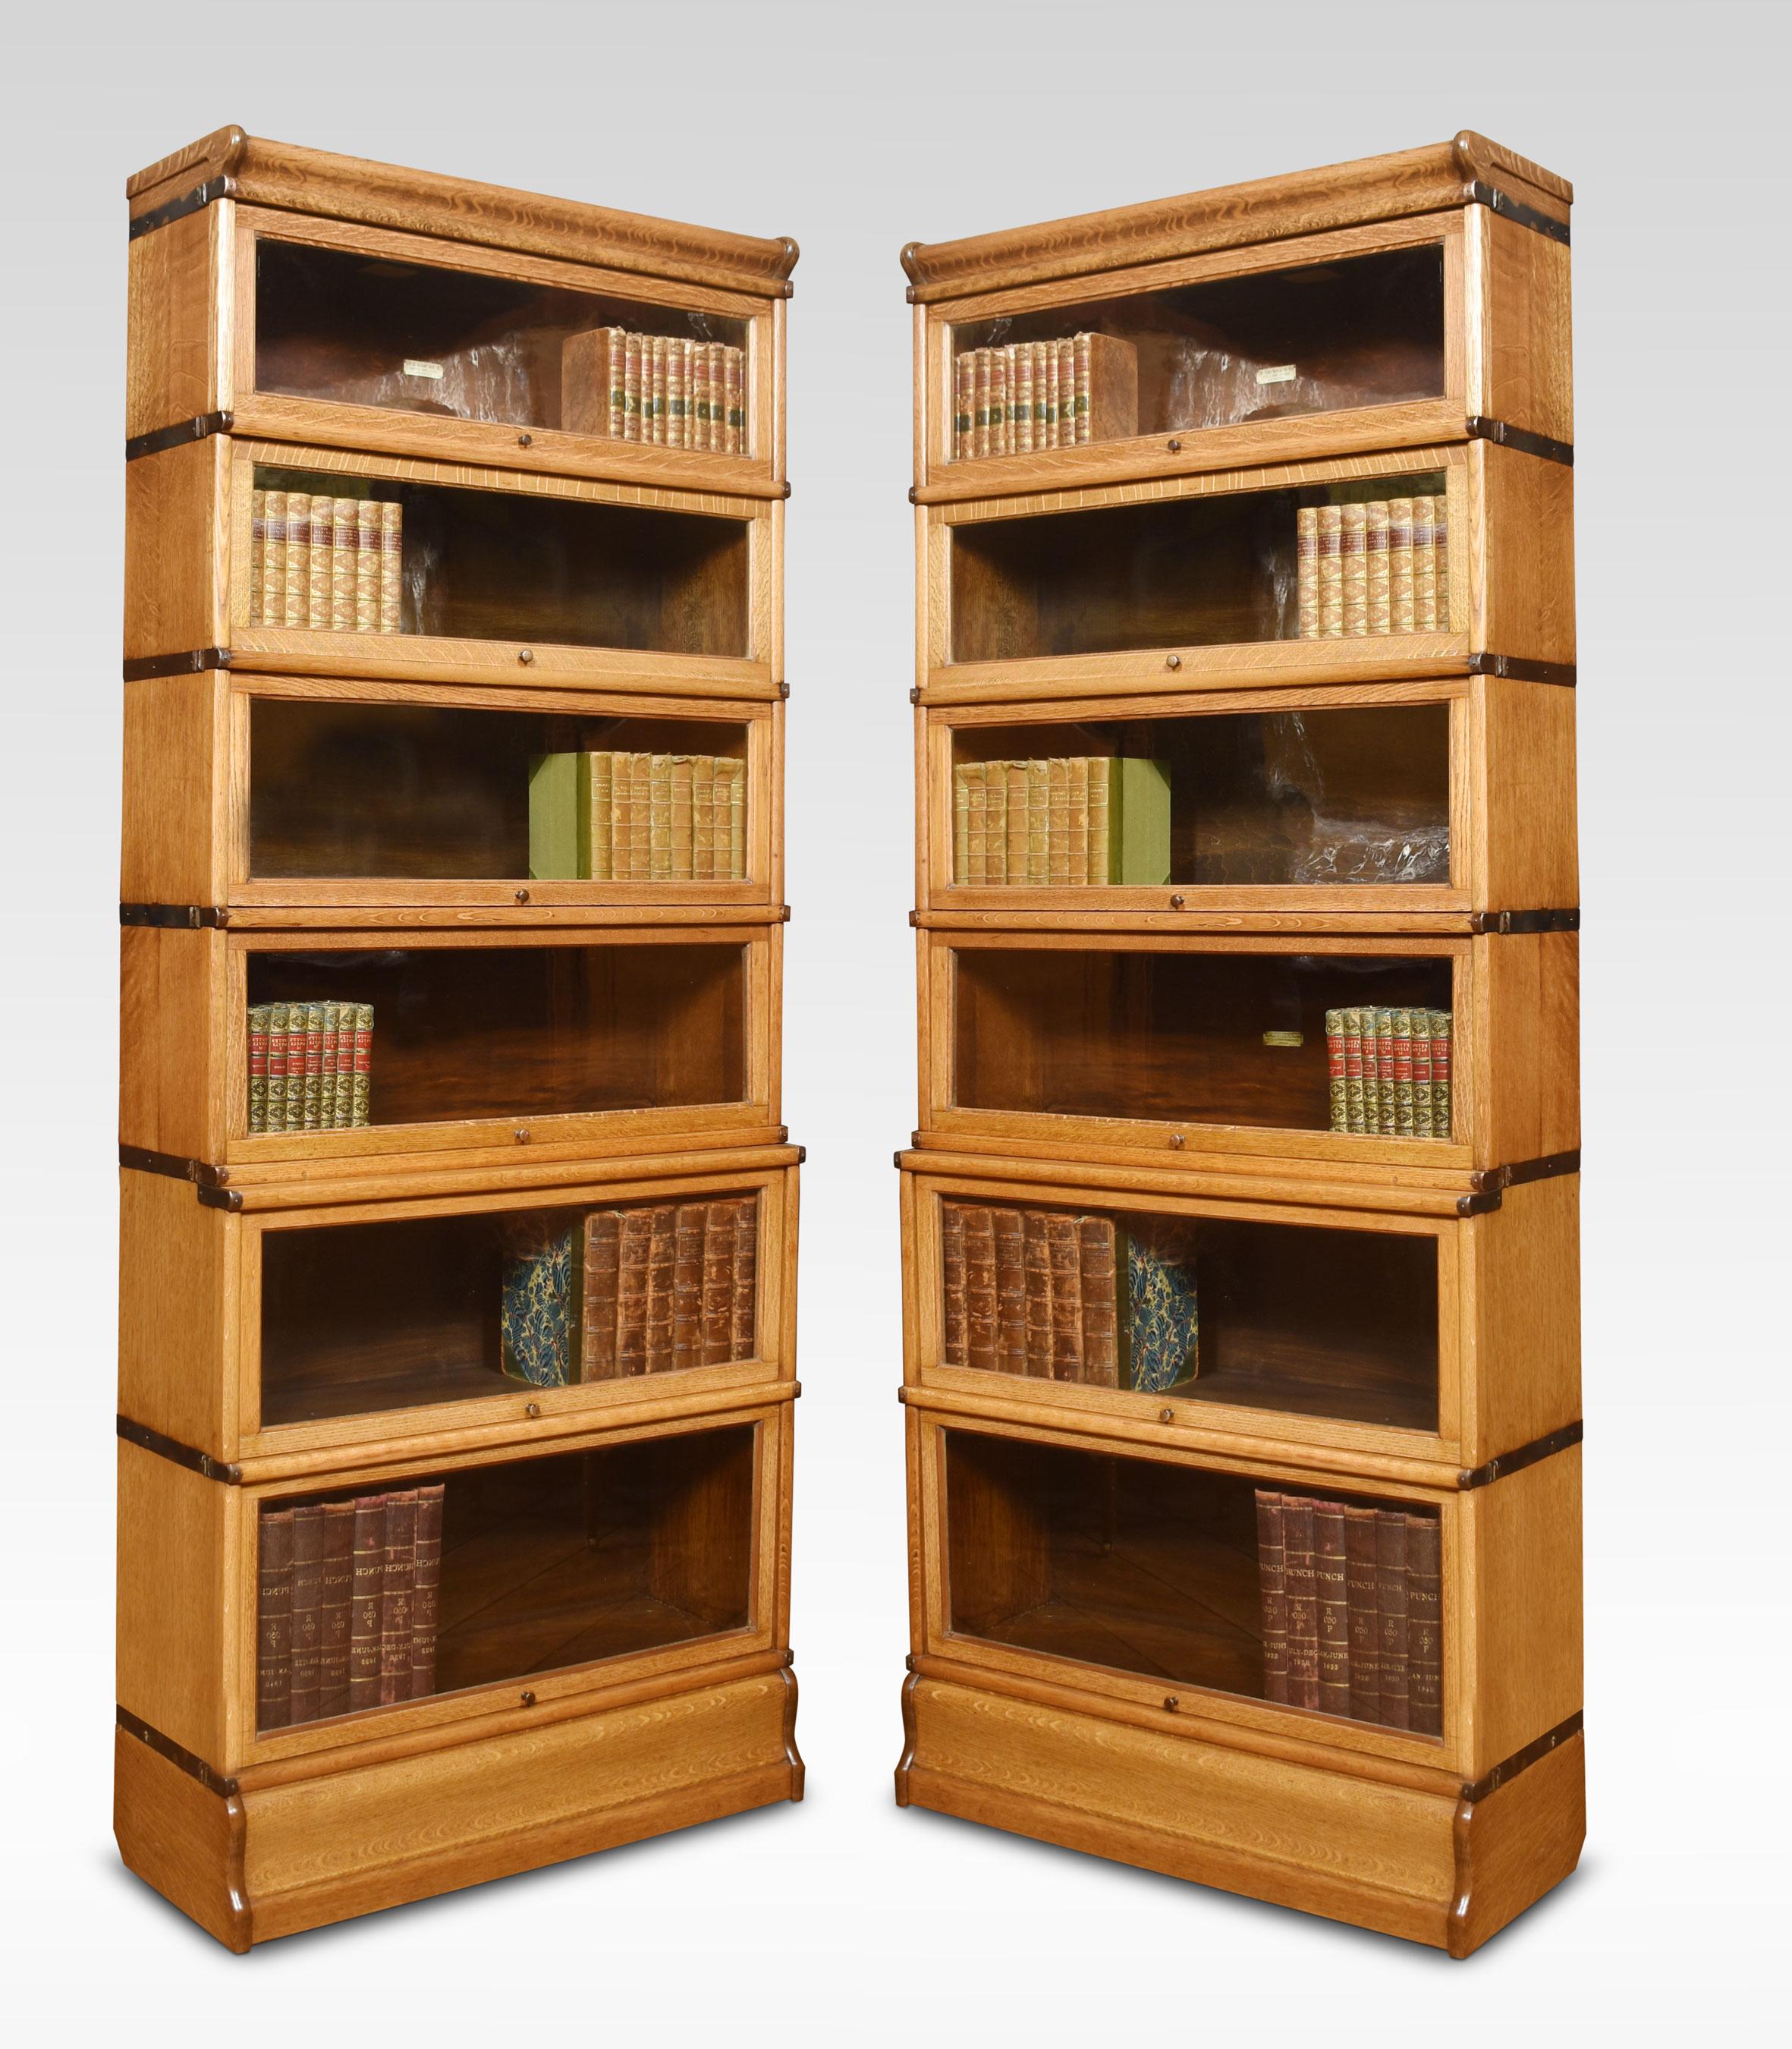 Pair of oak globe Wernicke six-section bookcases, the moulded top above six graduated sections all having glazed doors, raised up on plinth base.
Dimensions
Height 82 Inches
Width 34 Inches
Depth 12.5 Inches.